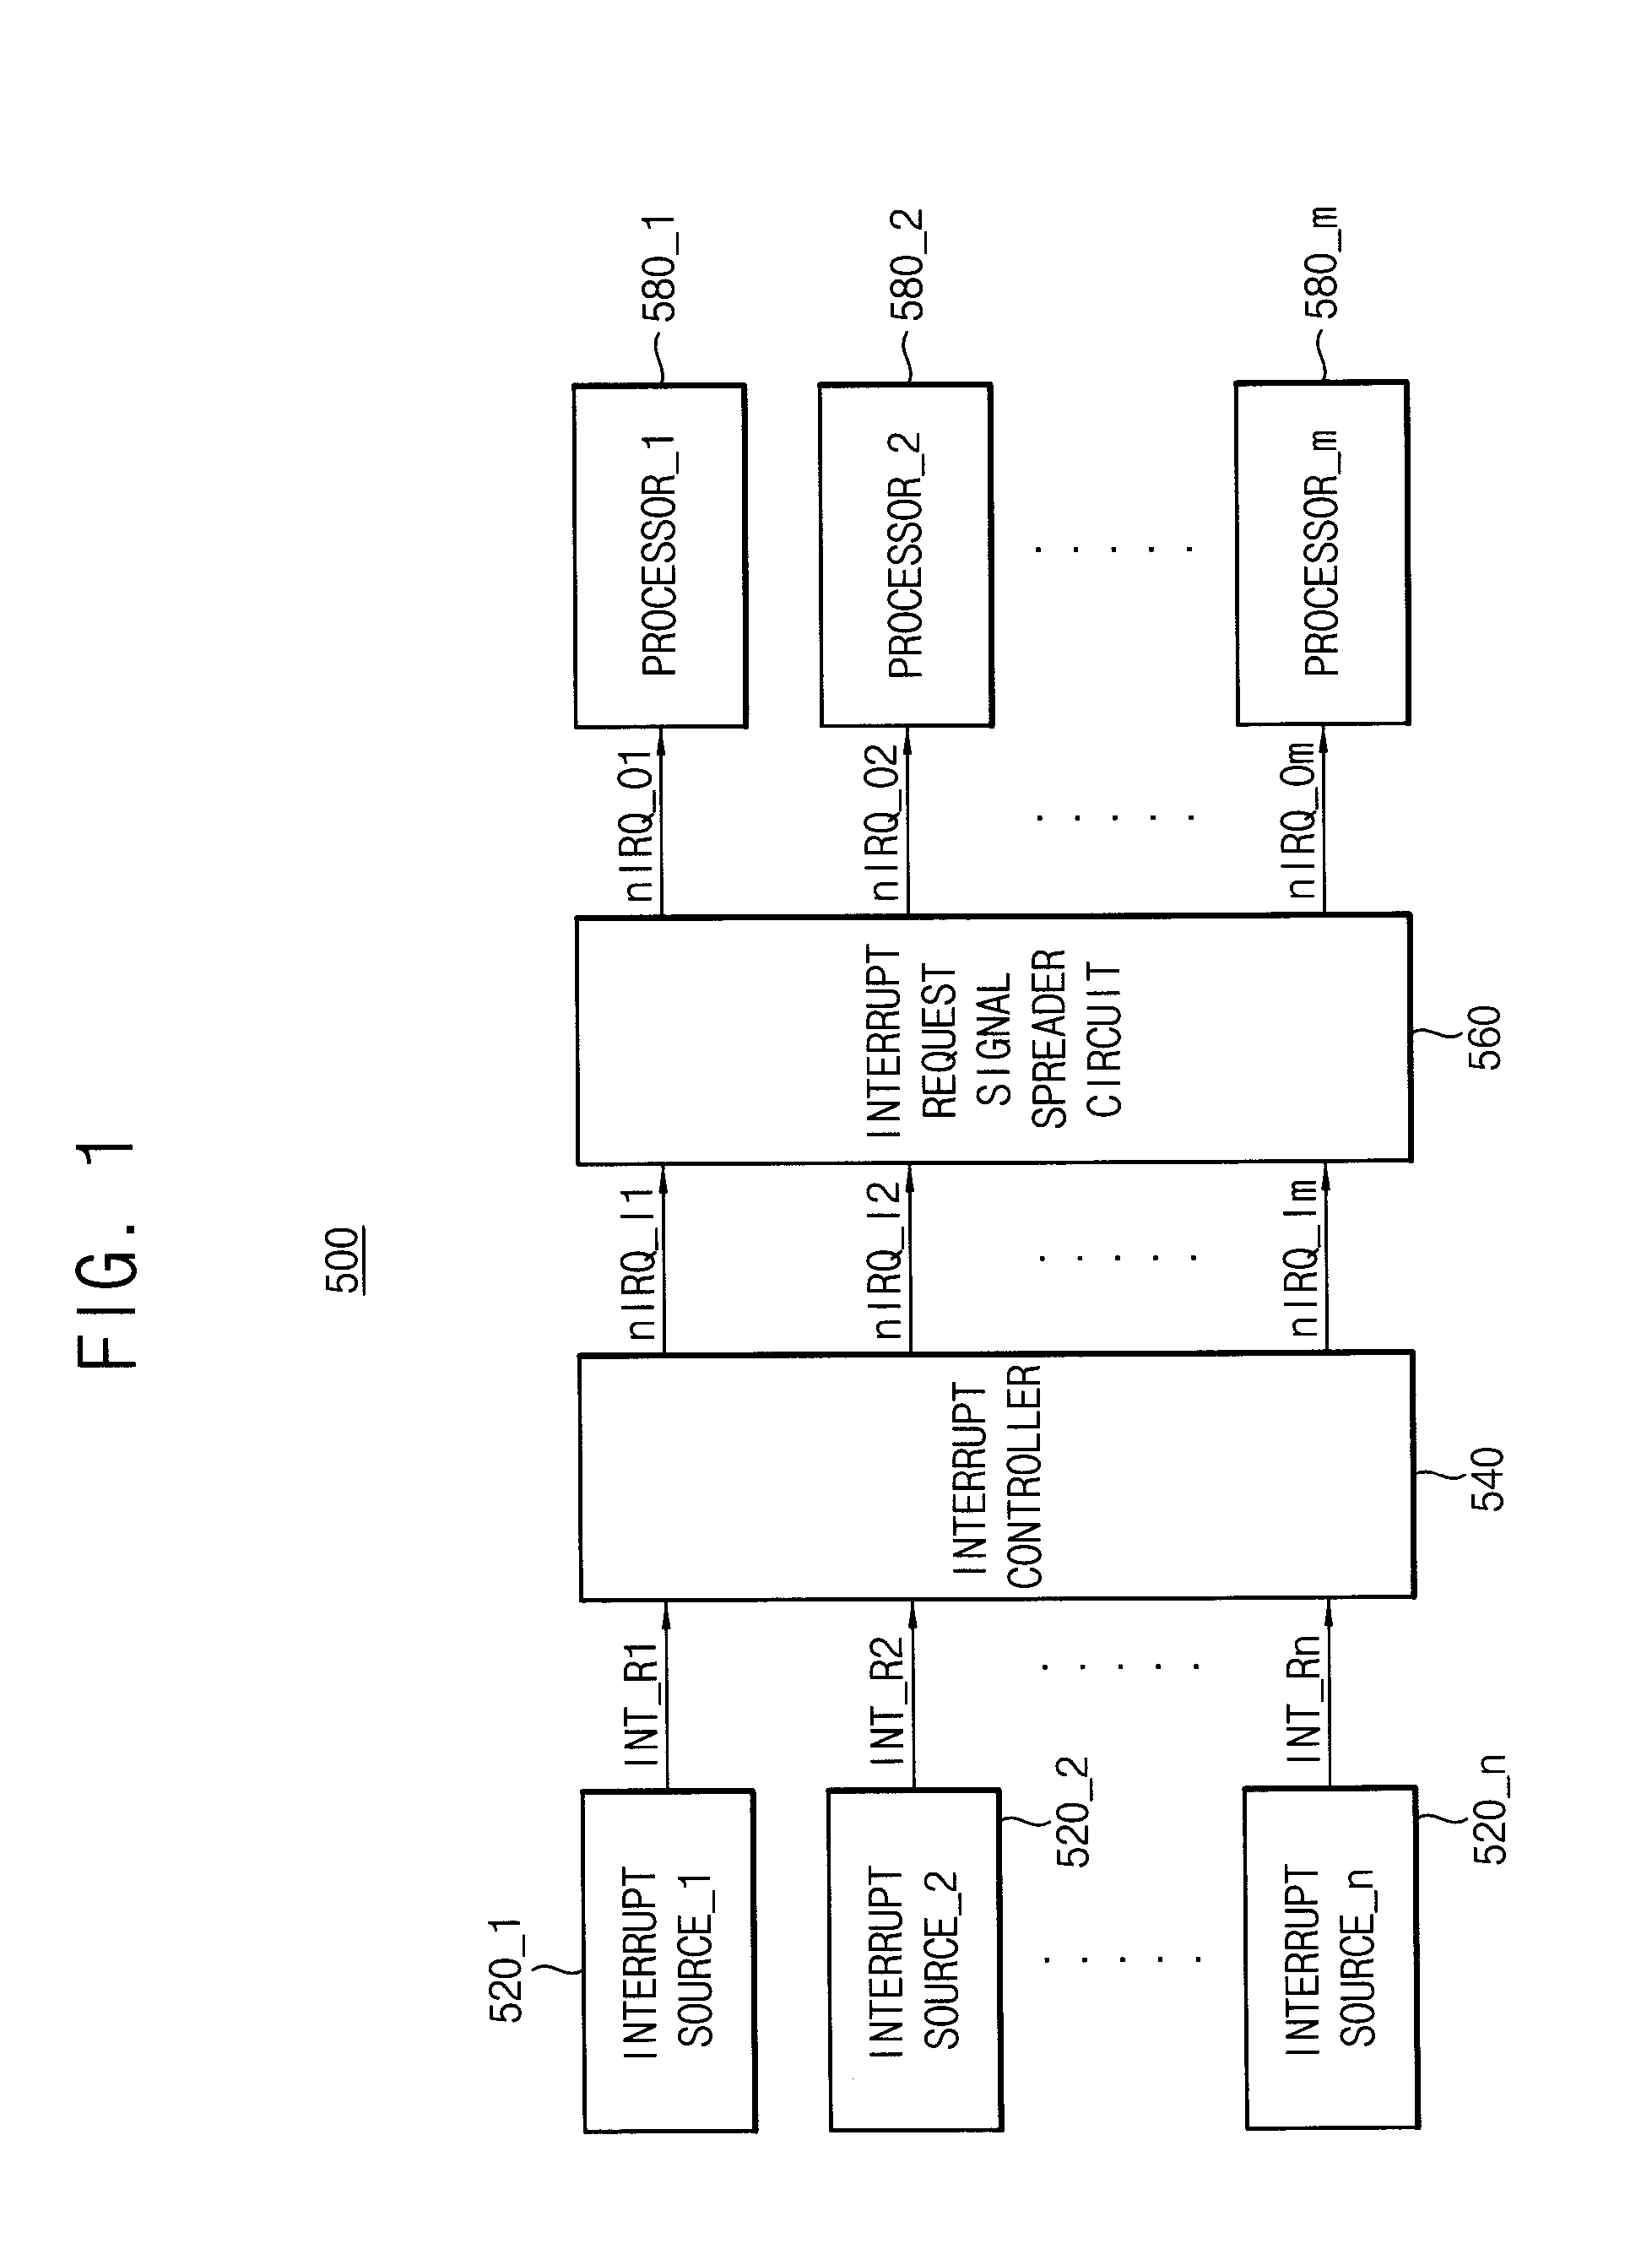 Methods of spreading plurality of interrupts, interrupt request signal spreader circuits, and systems-on-chips having the same